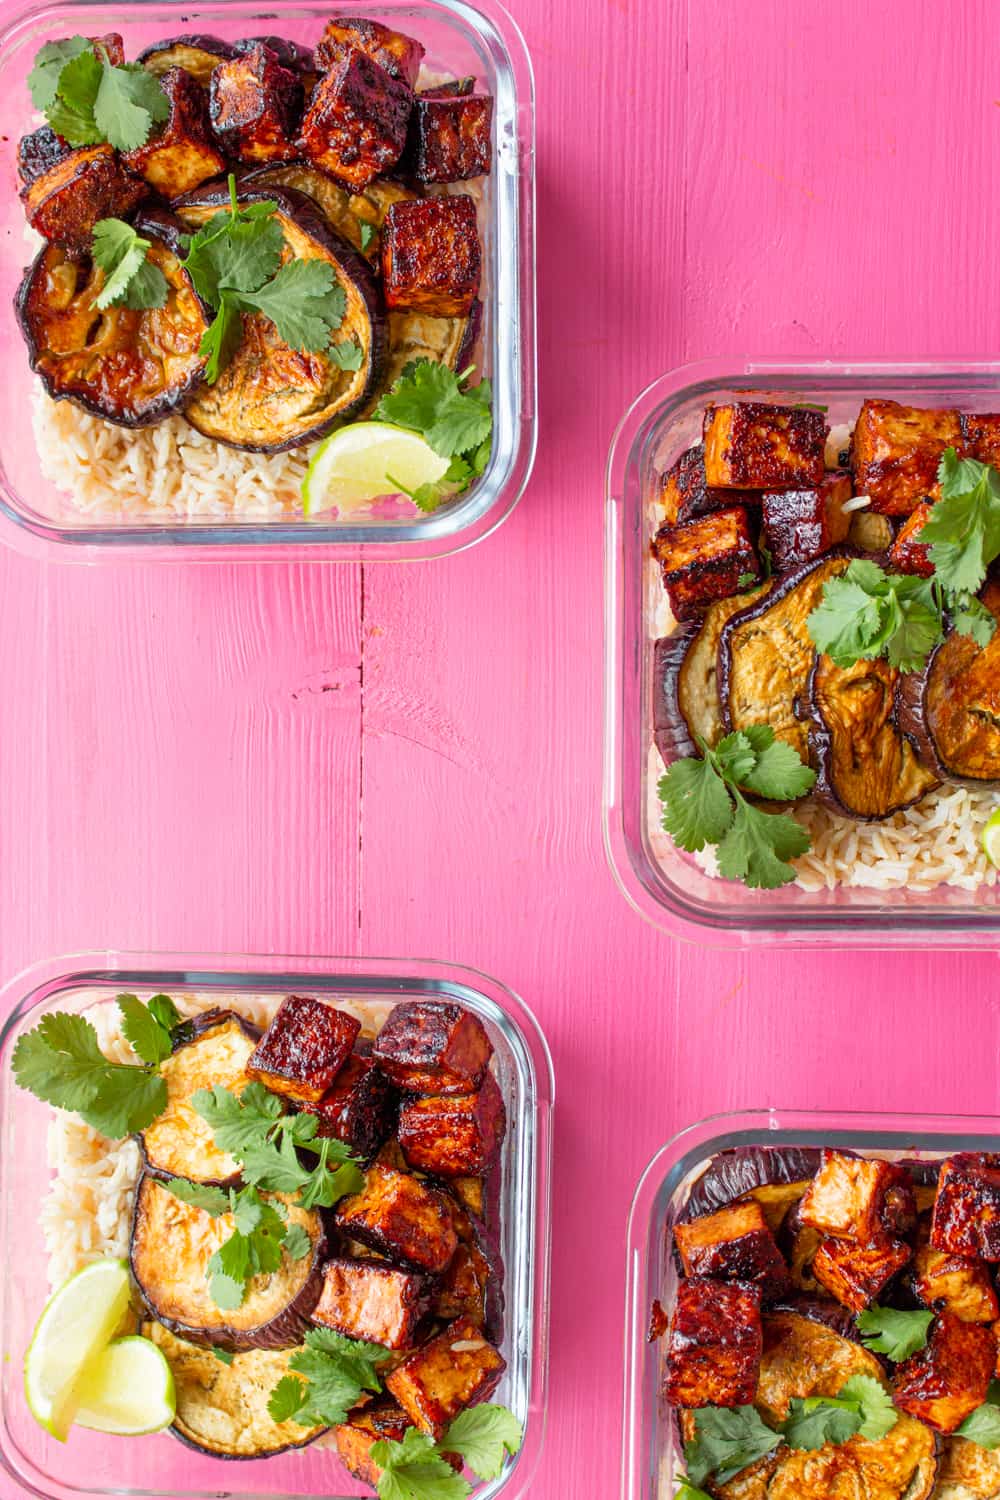 Aubergine and crispy soy tofu & rice in 4 meal prep containers topped with coriander and lime wedges on a pink background.